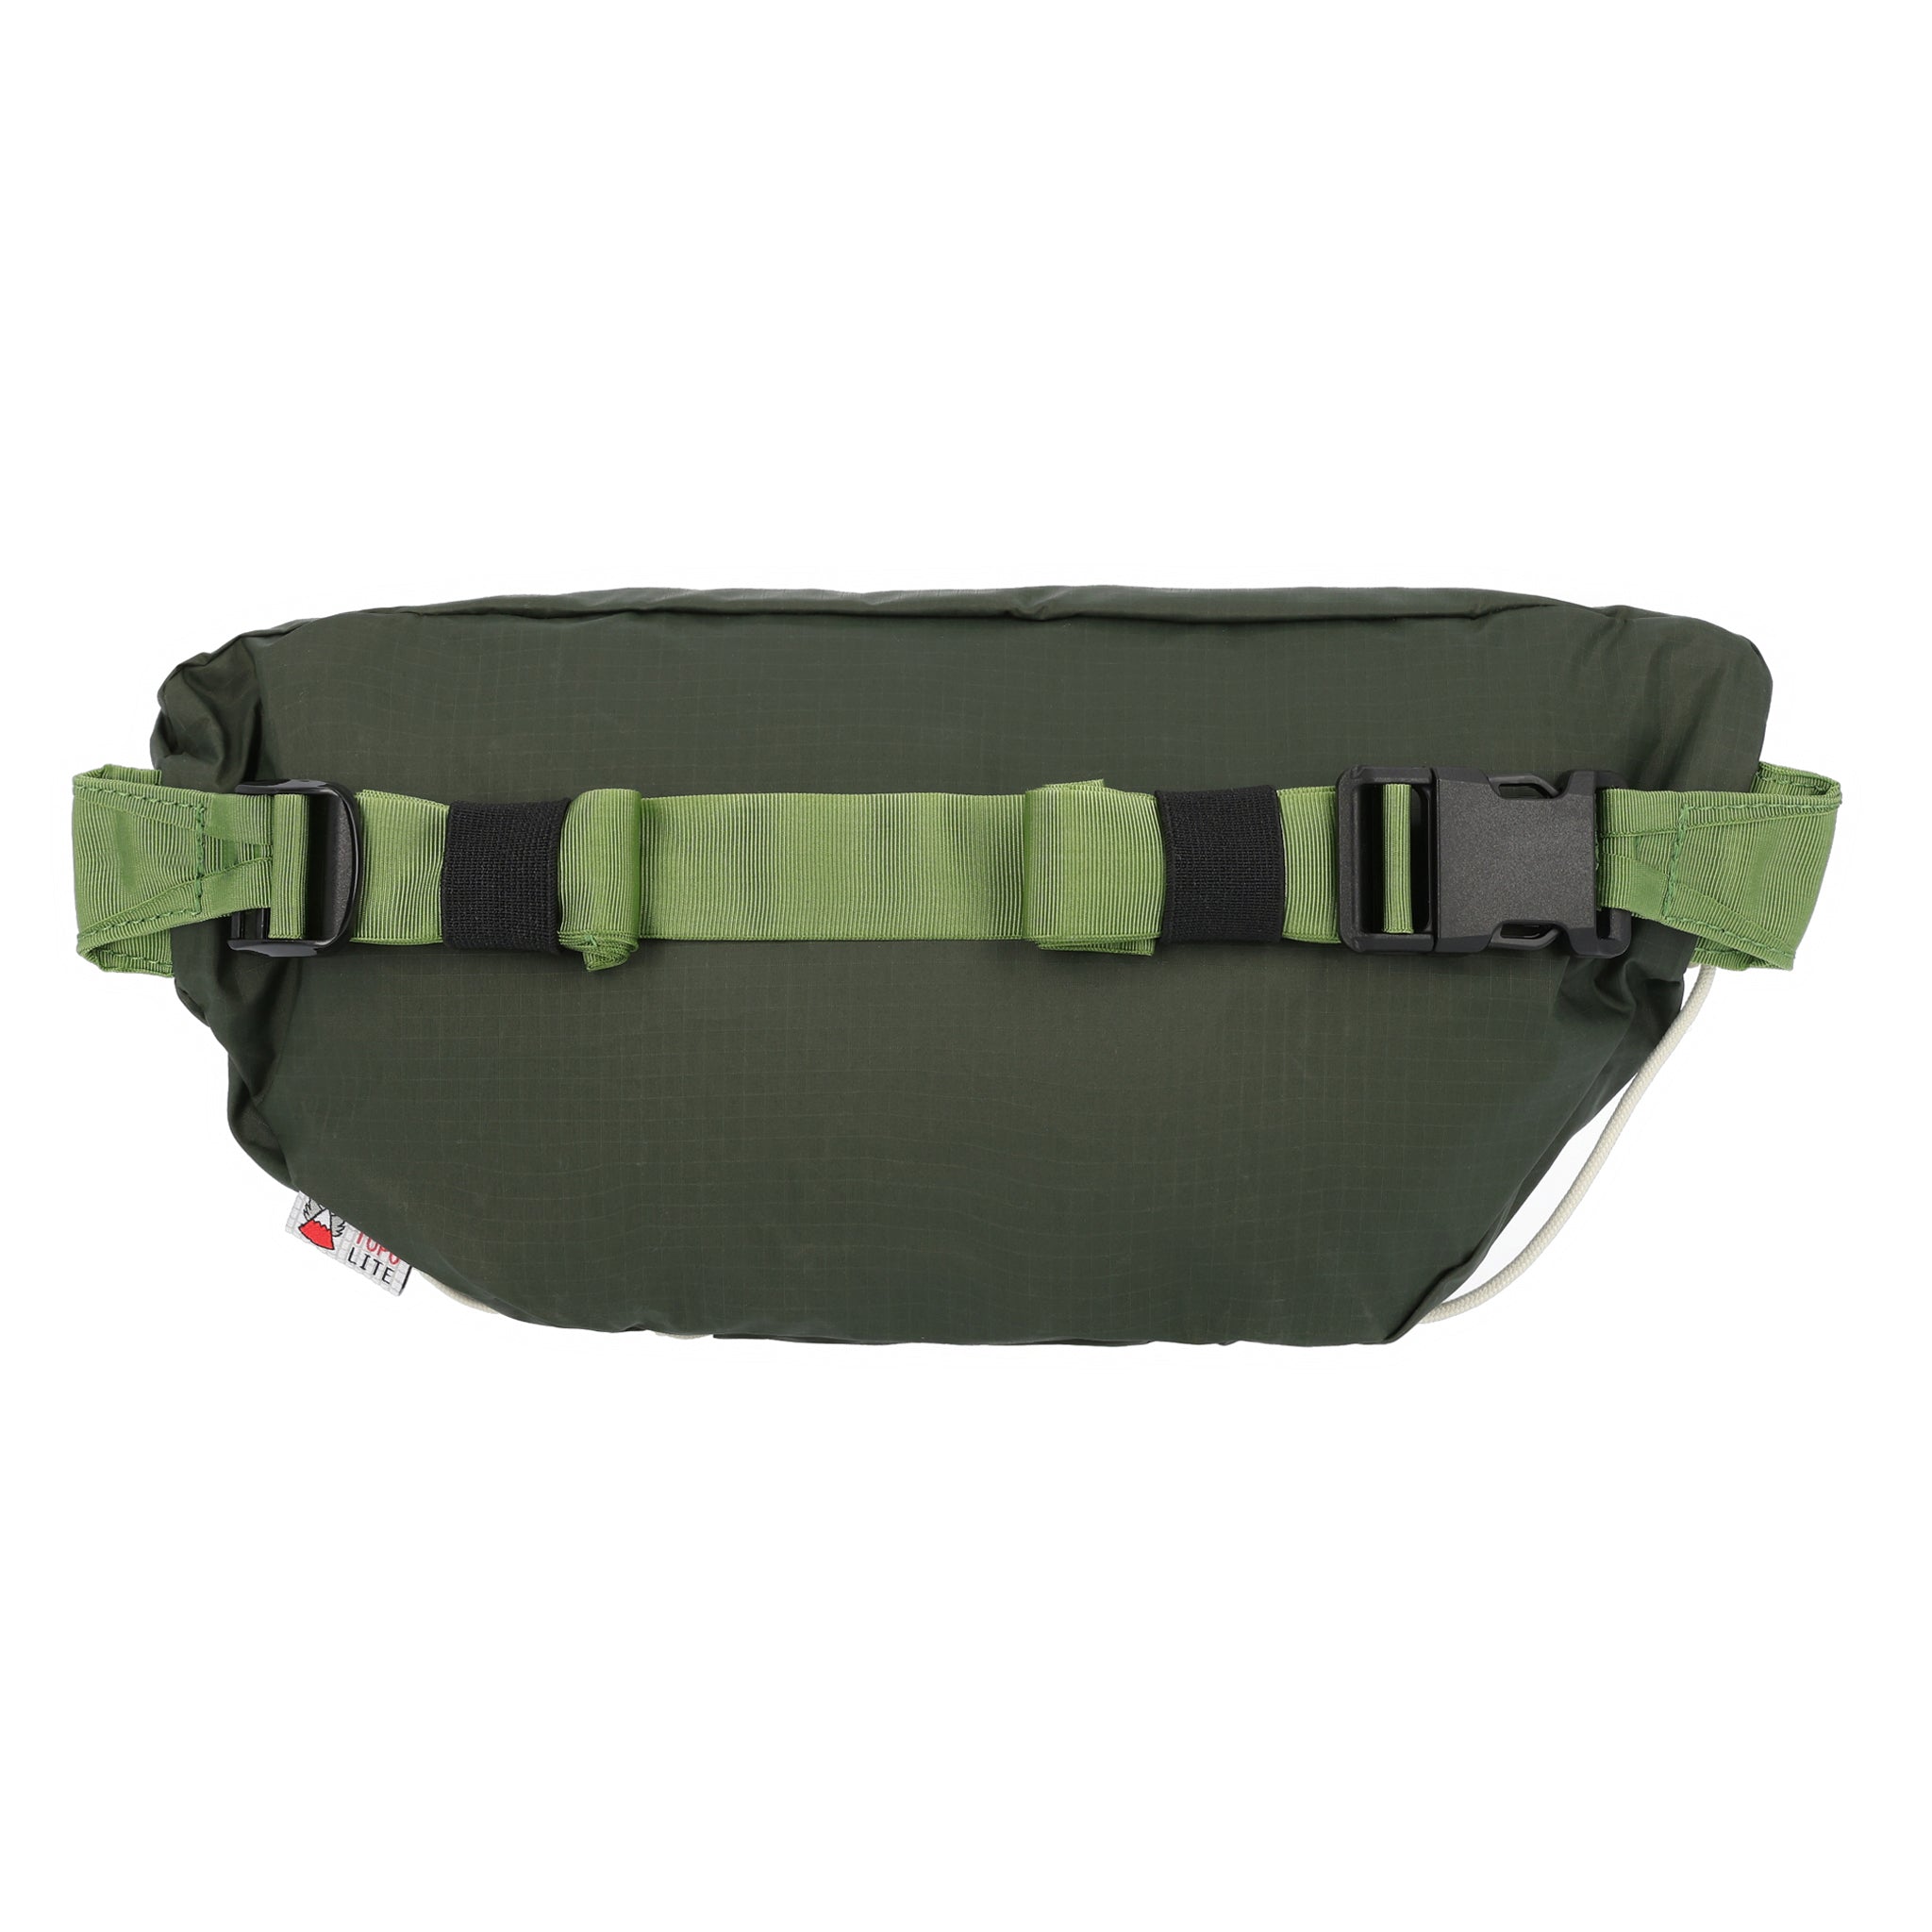 Supreme Waist Bag Water resistant nylon ripstop with X-Pac